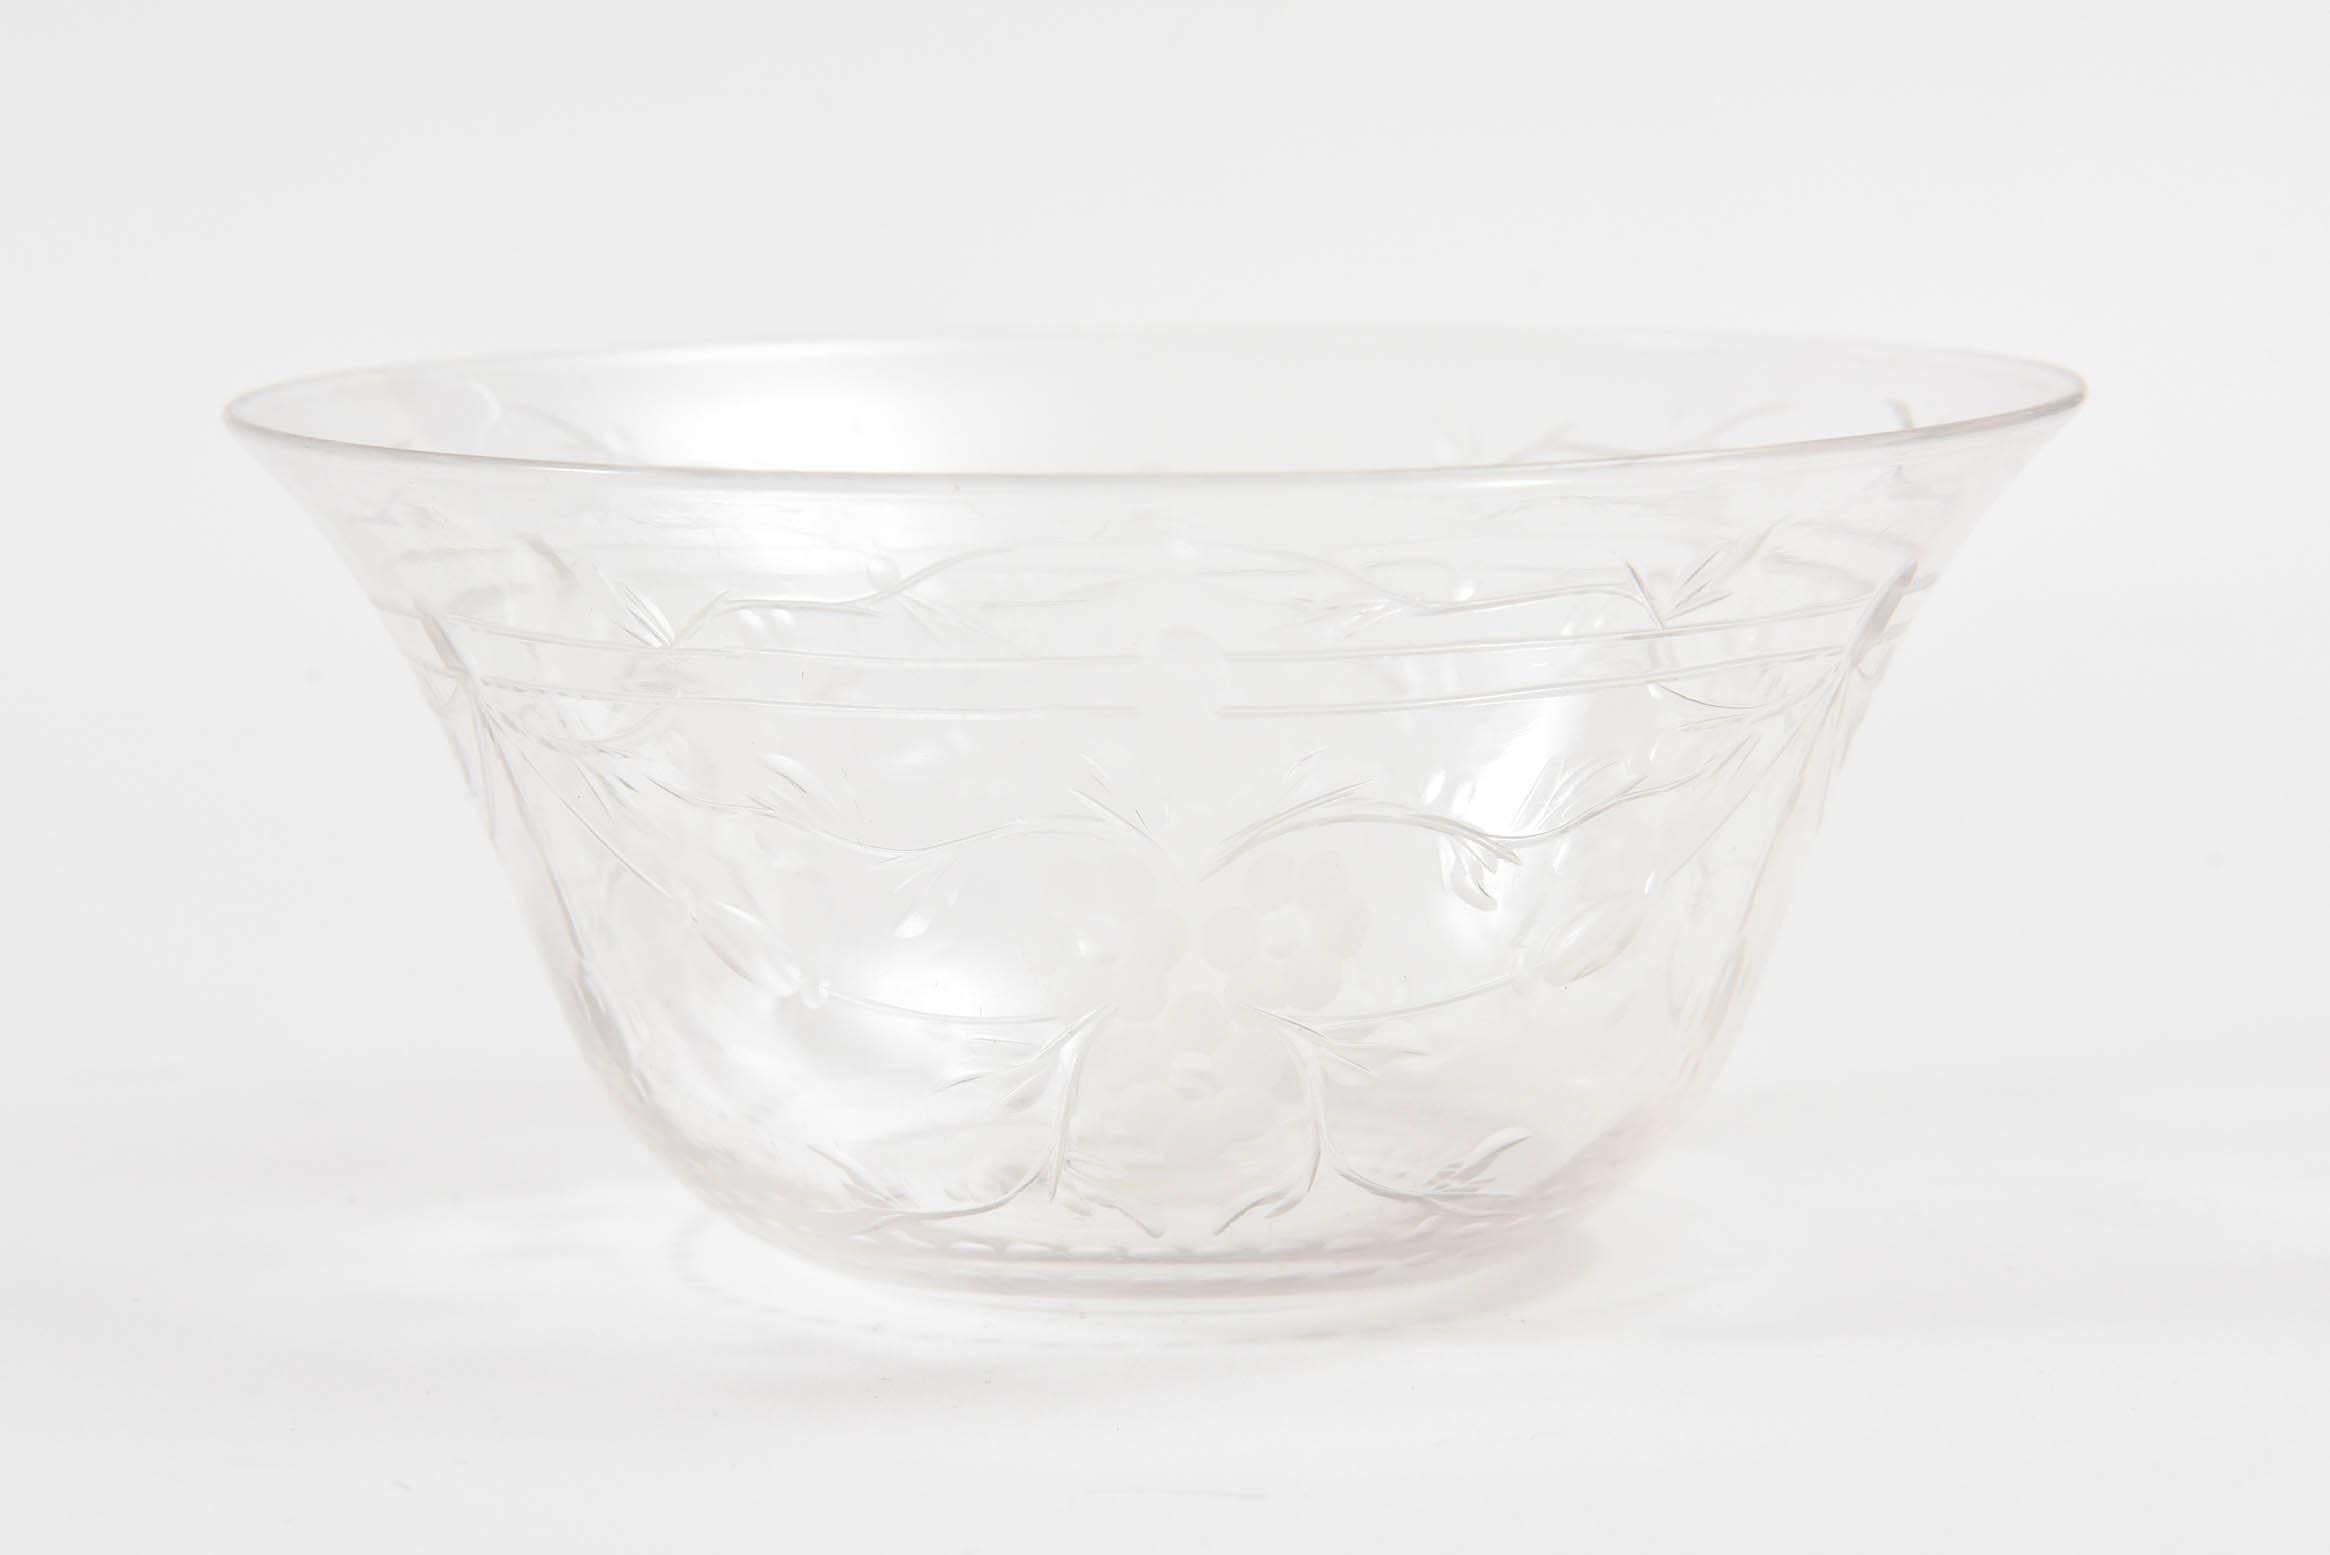 Hand-Crafted 8 Crystal Dessert Bowls, Intaglio Engraved circa 1920 Attributed to Webb England